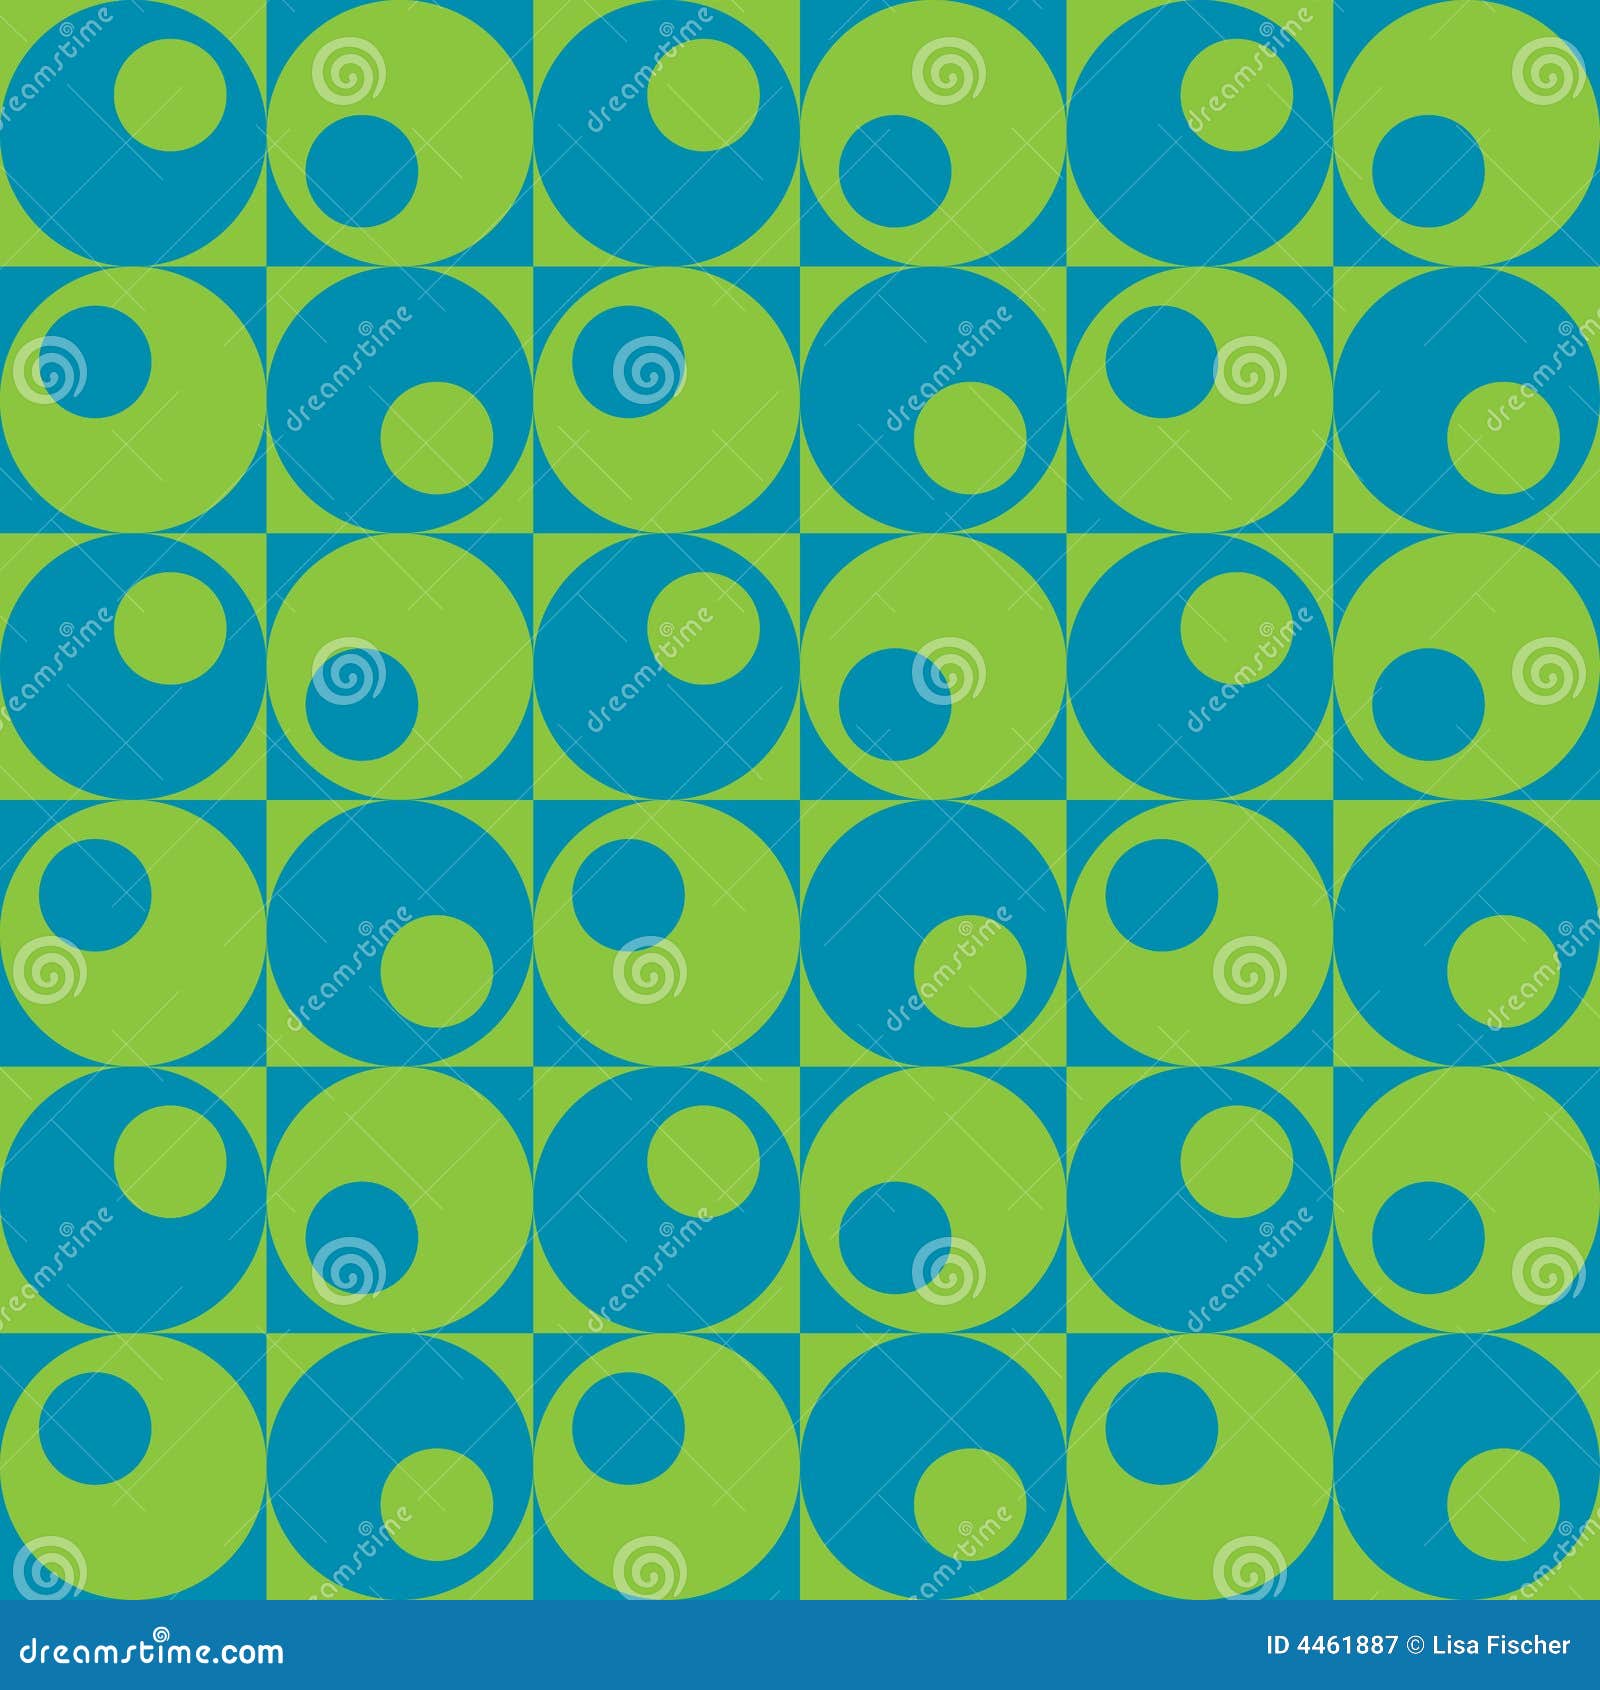 Circles In Squares_Blue-Green. A repeat pattern of circles and squares in blue and green.